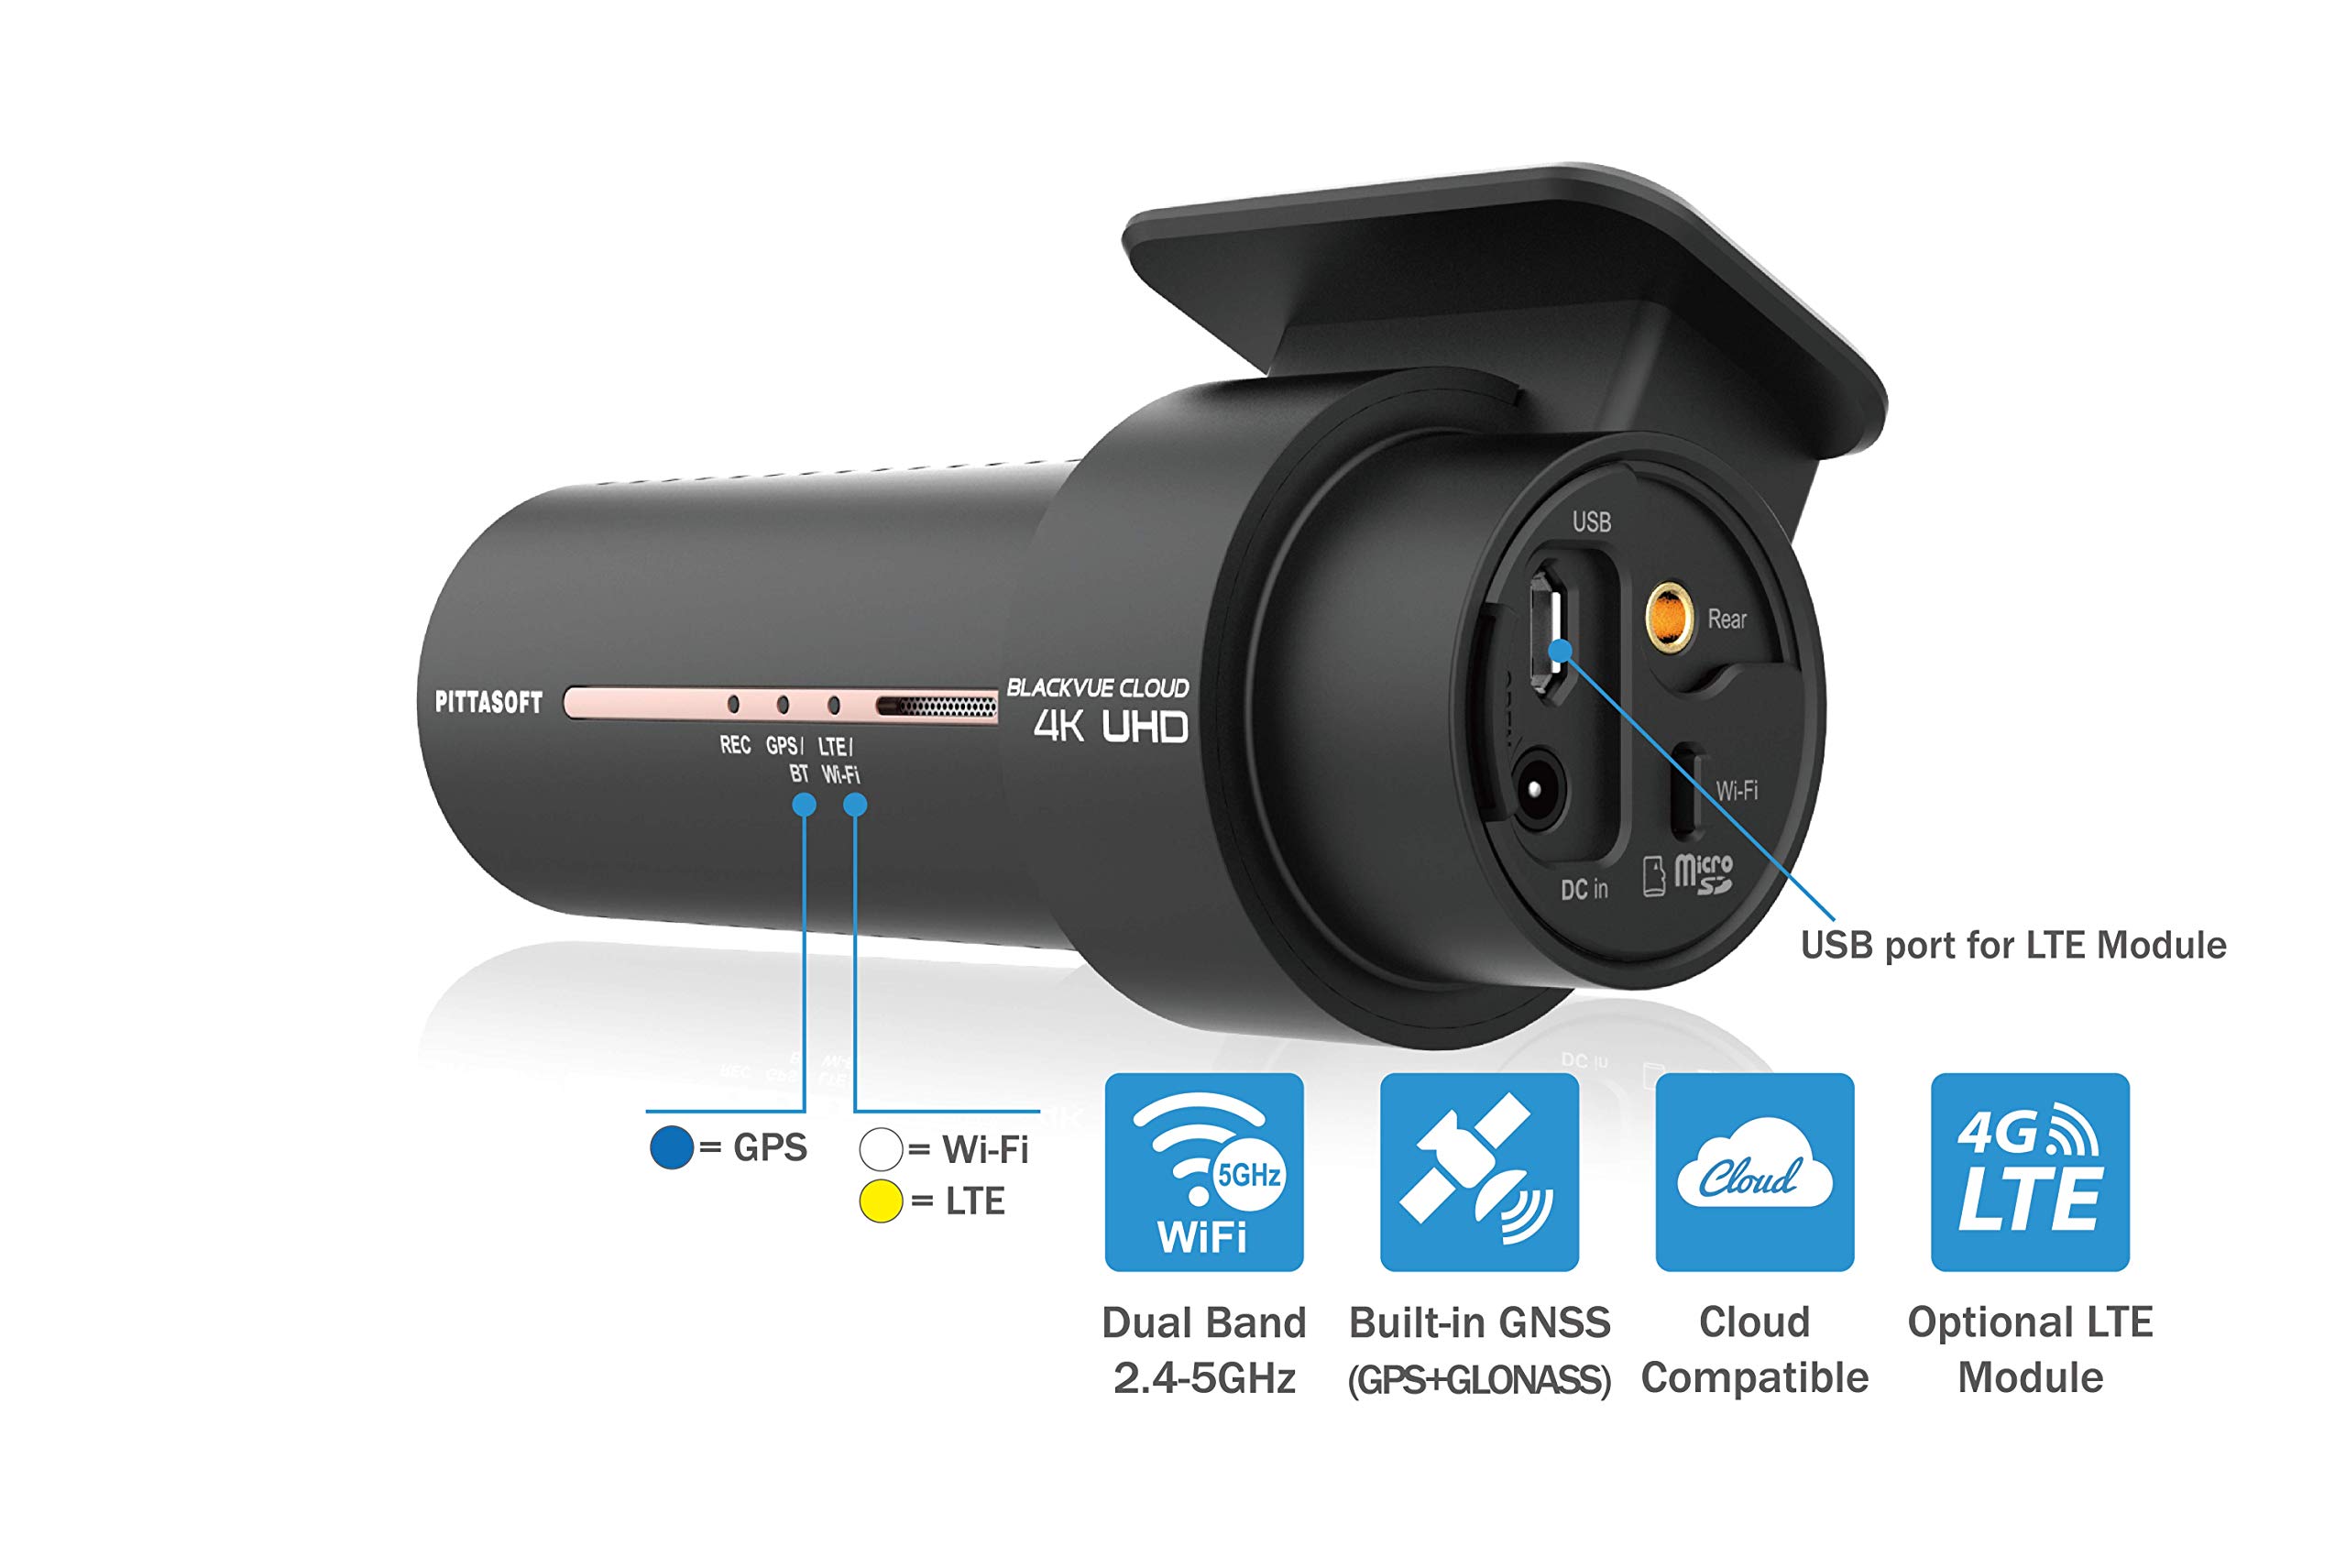 BlackVue DR900X-2CH with 32GB microSD Card | 4K UHD Cloud front Dashcam | Built-in Wi-Fi, GPS, Parking Mode Voltage Monitor | LTE via Optional CM100 LTE Module